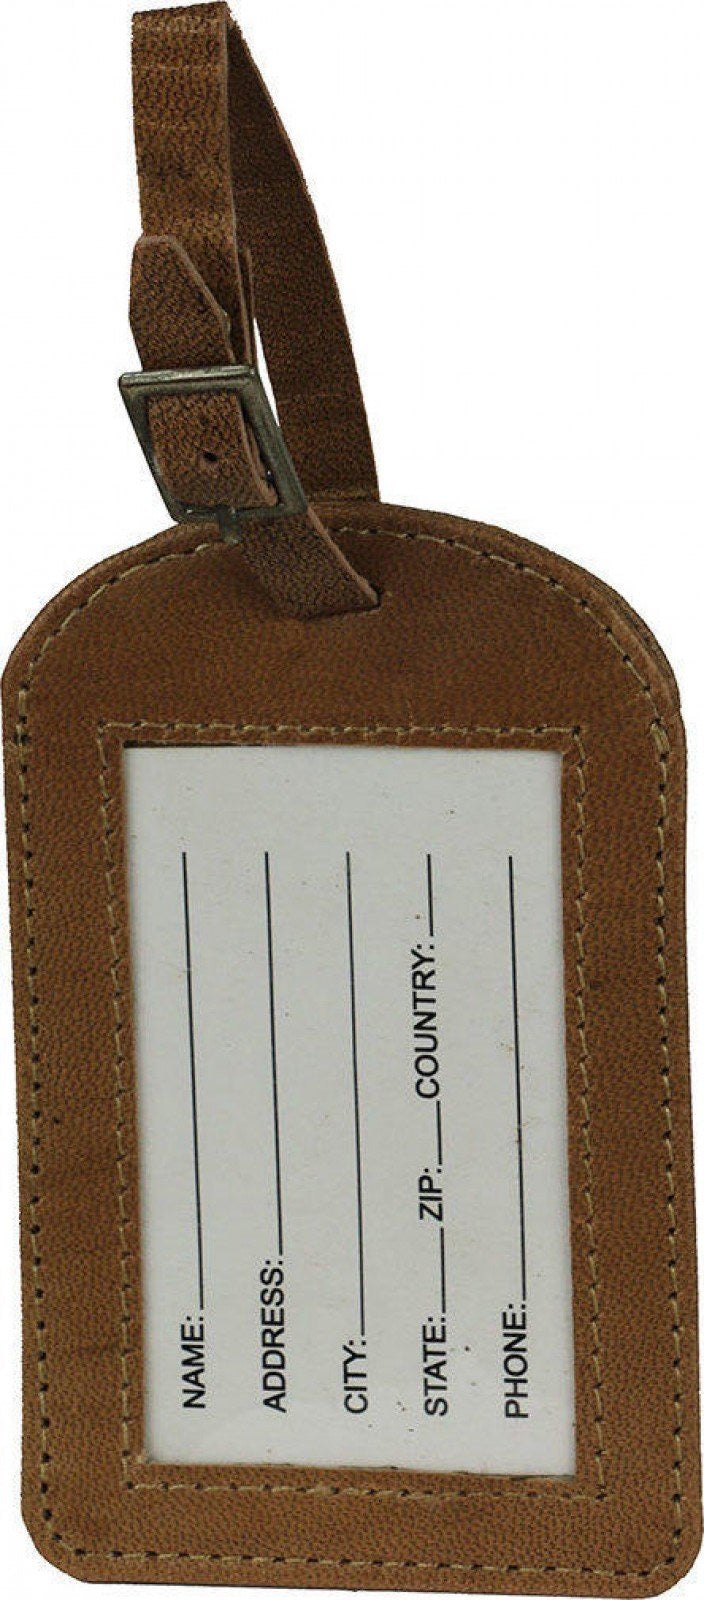 Leather travel luggage tag